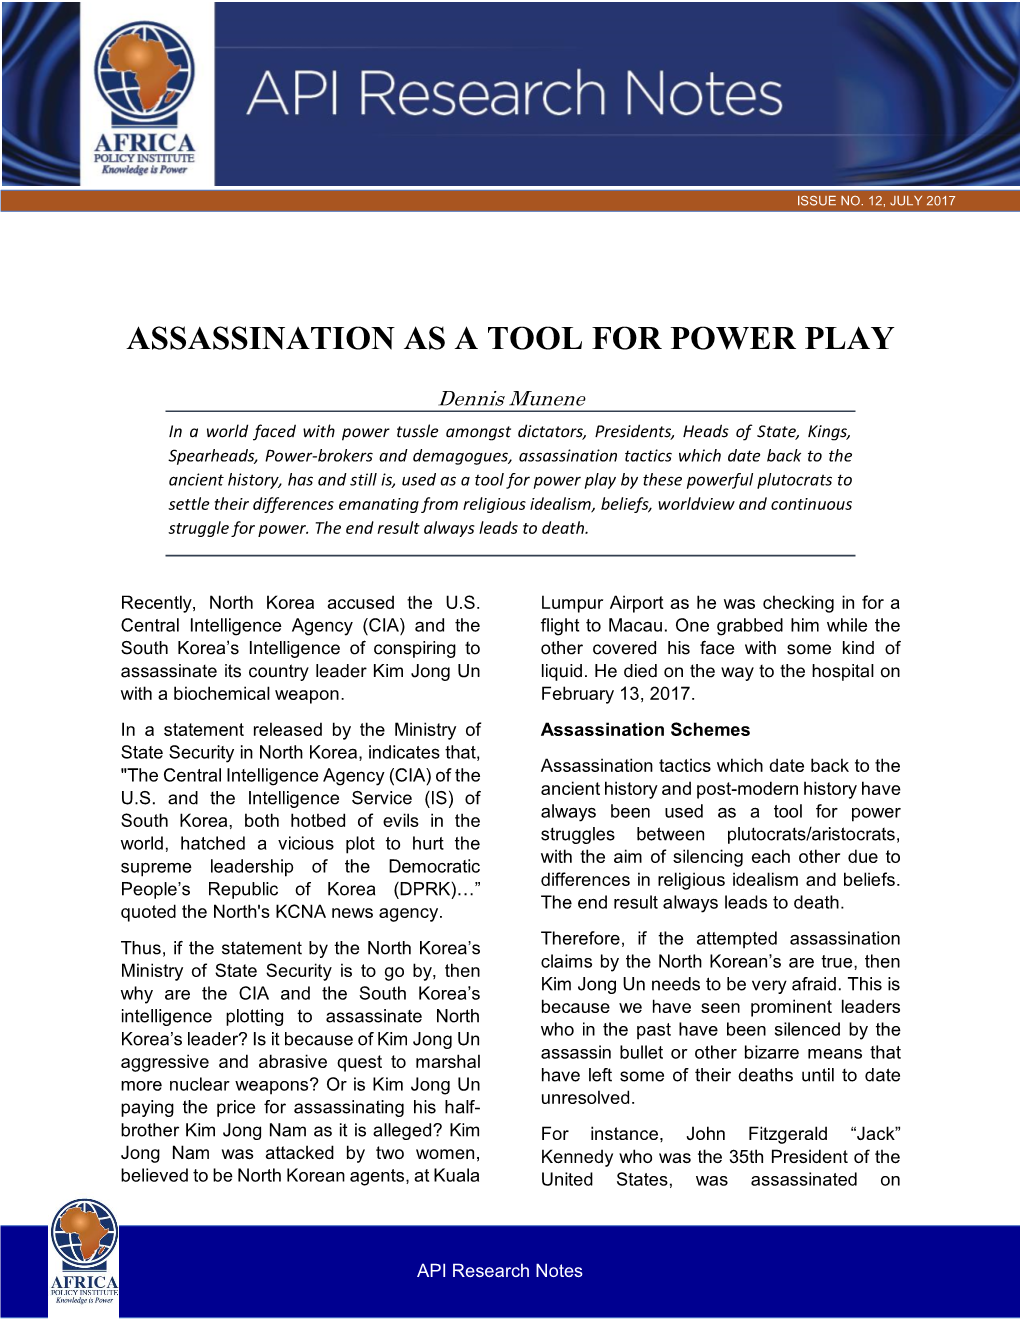 Assassination As a Tool for Power Play